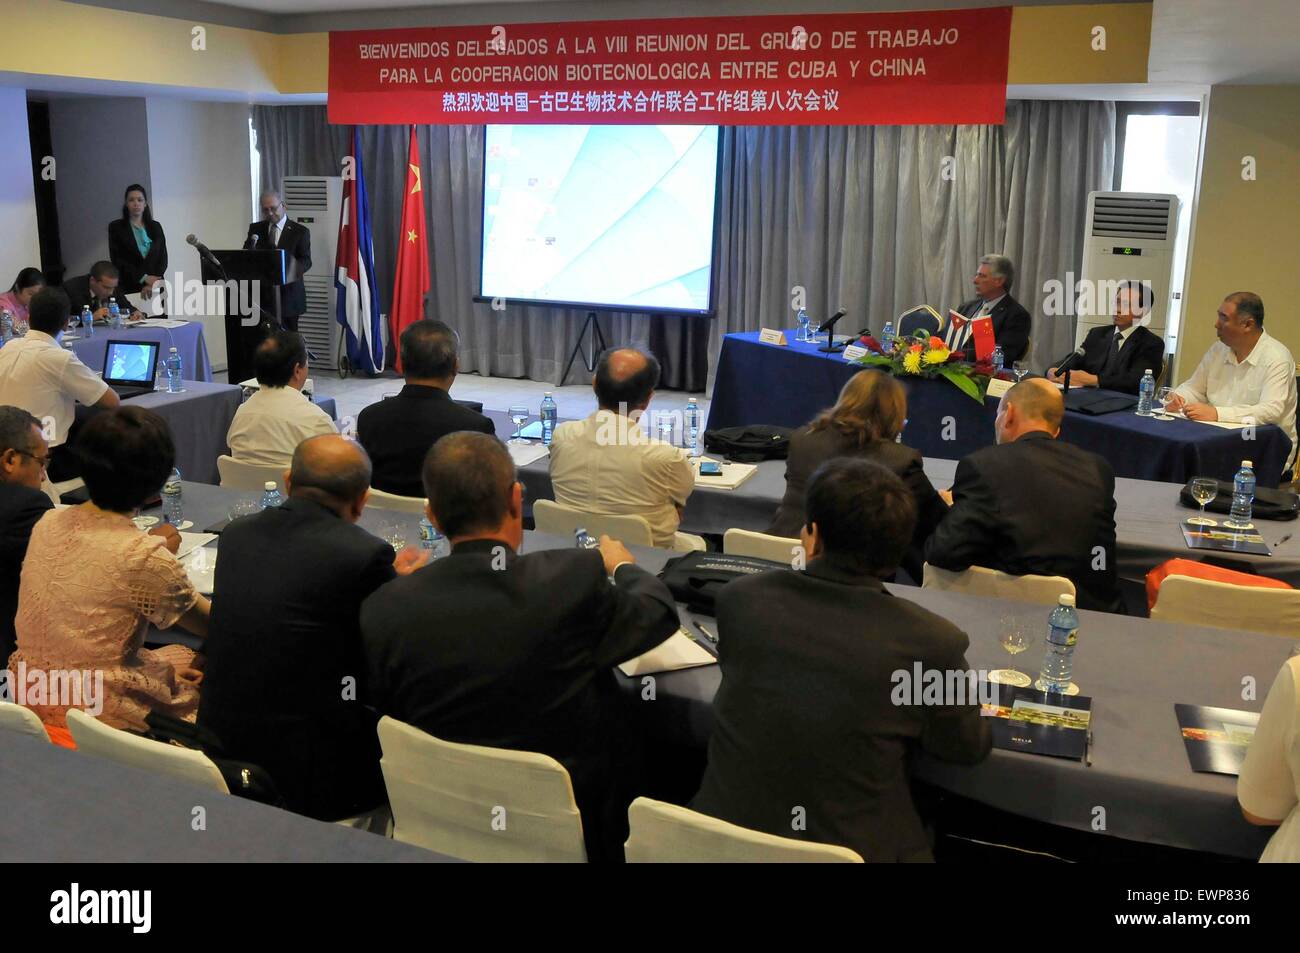 Havana. 29th June, 2015. Photo taken on June 29, 2015 shows the 8th meeting of the Cuba-China Joint Working Group on Biotechnology in the city of Havana, capital of Cuba. Cuba and China are set to expand cooperation in the field of biotechnology, the Cuban News Agency (ACN) reported Sunday. © Joaquin Hernandez/Xinhua/Alamy Live News Stock Photo